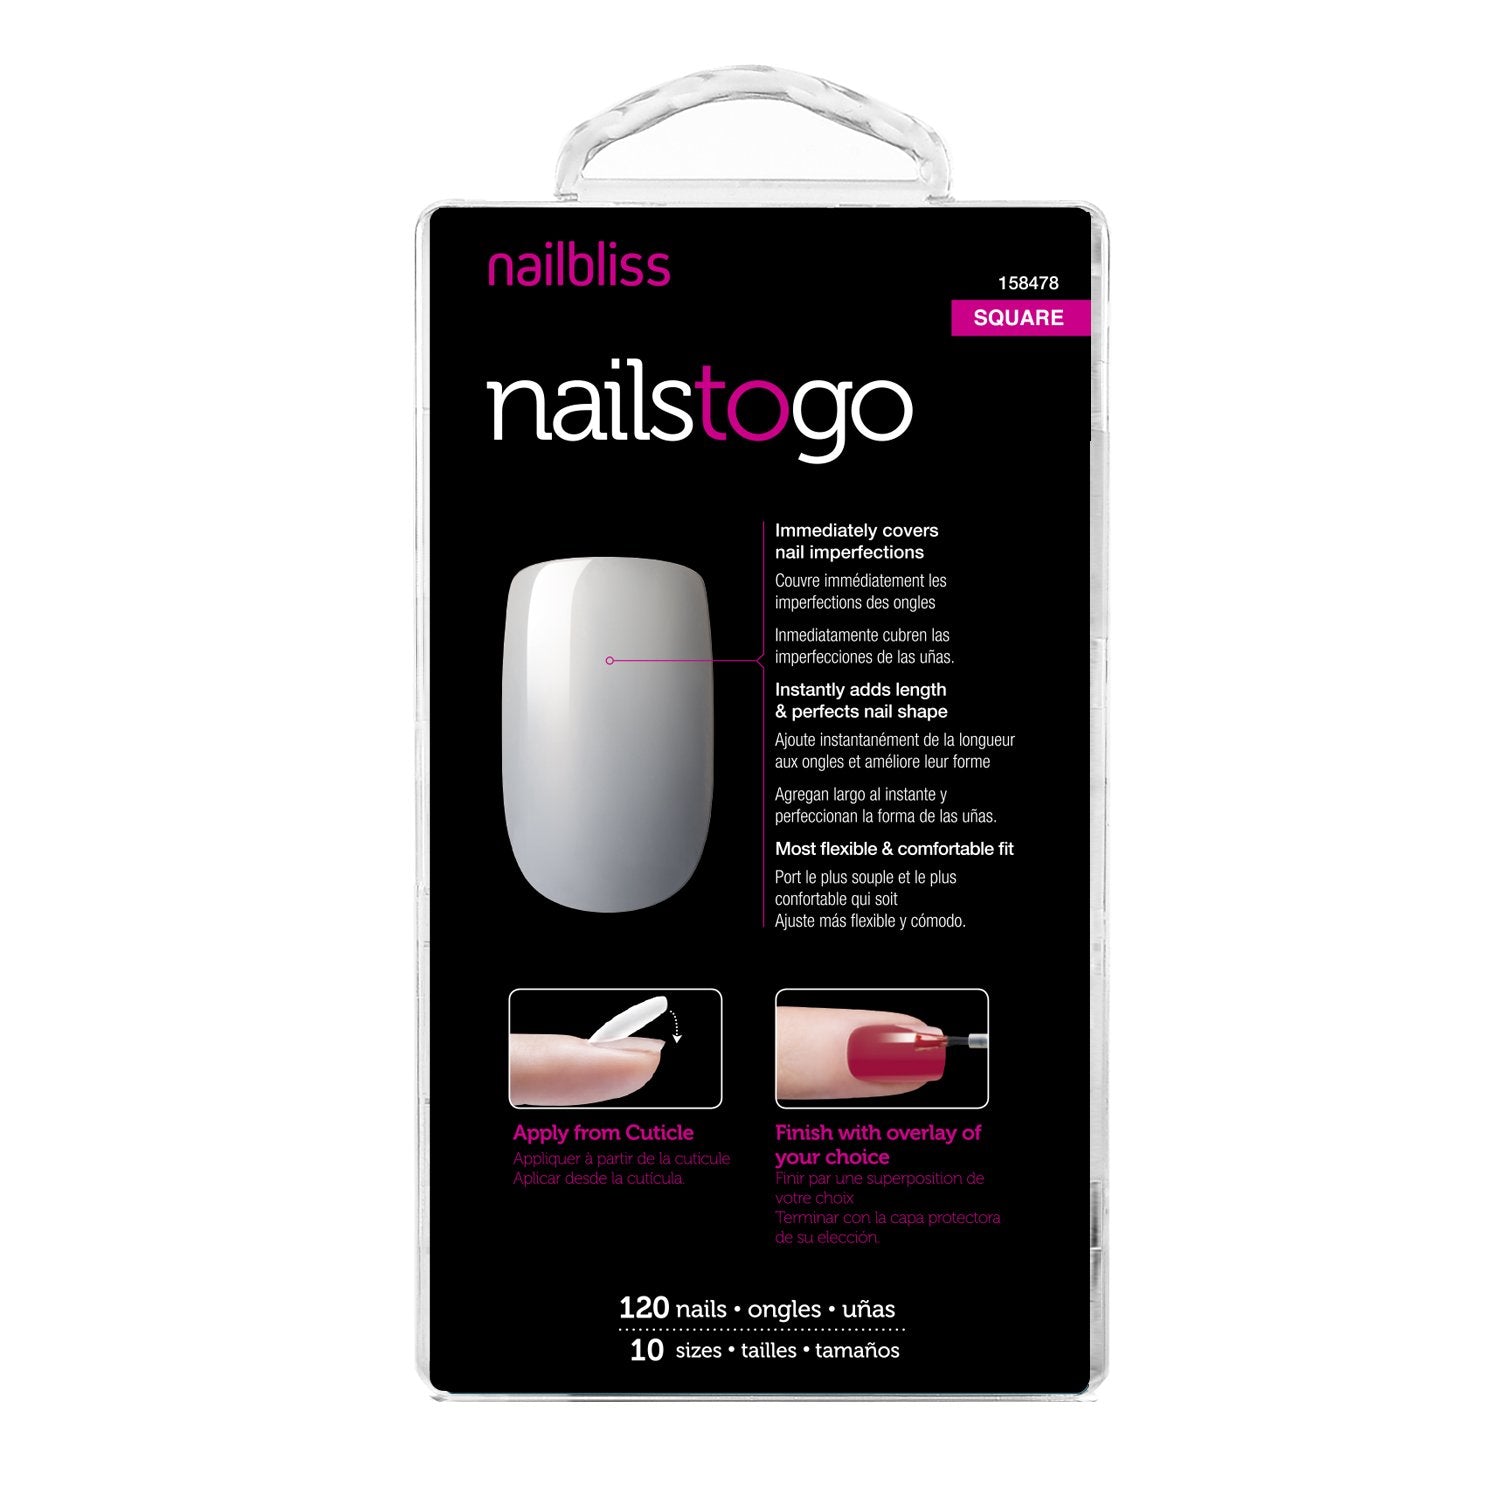 Makeup Nails Glue On Nails To Go SQUARE NTG01